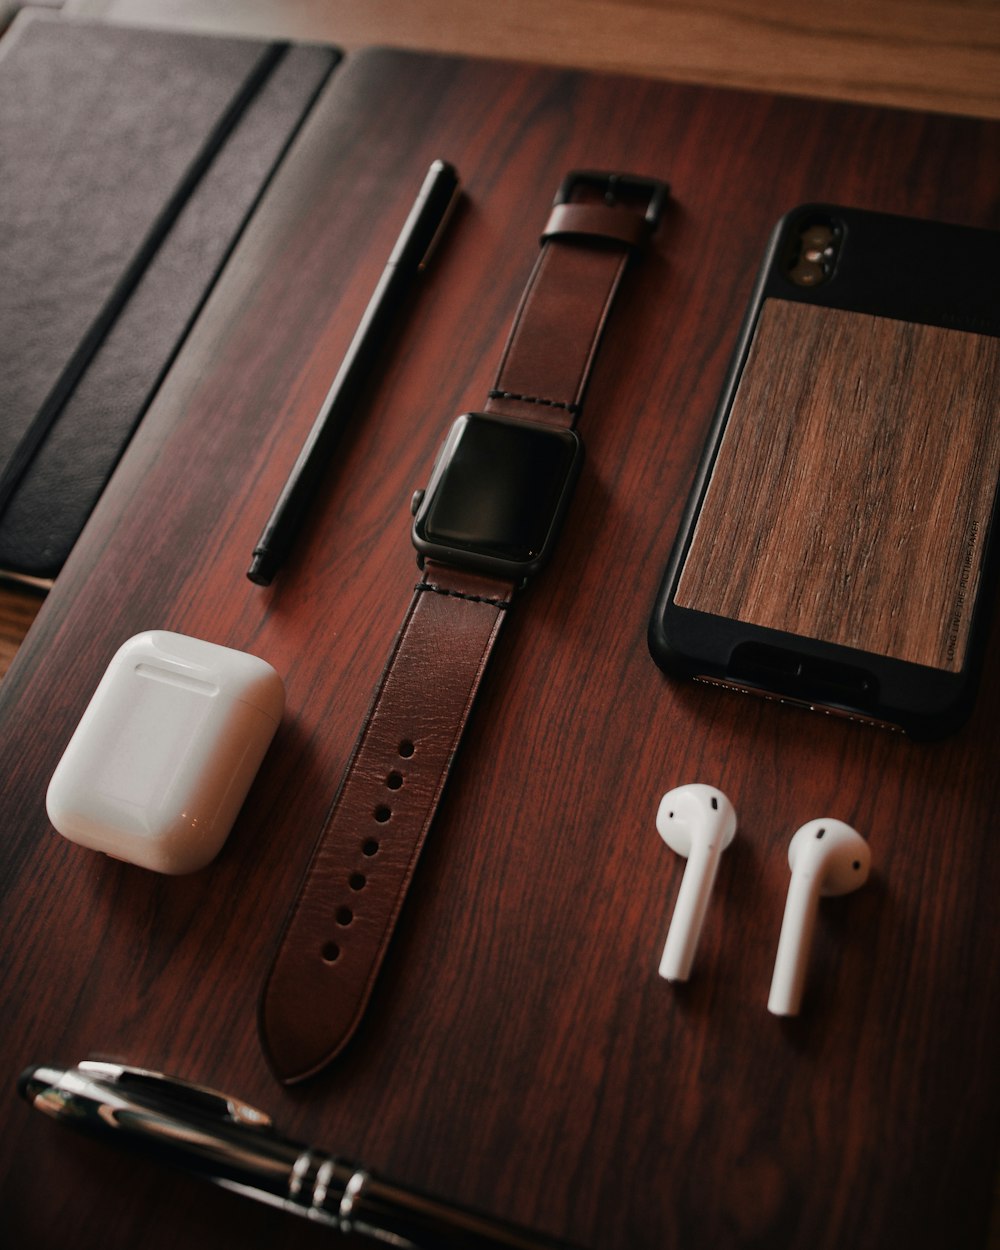 black aluminum Apple Watch with brown leather band, Apple AirPods with case, black pen, and brown and black case on brown wooden surface